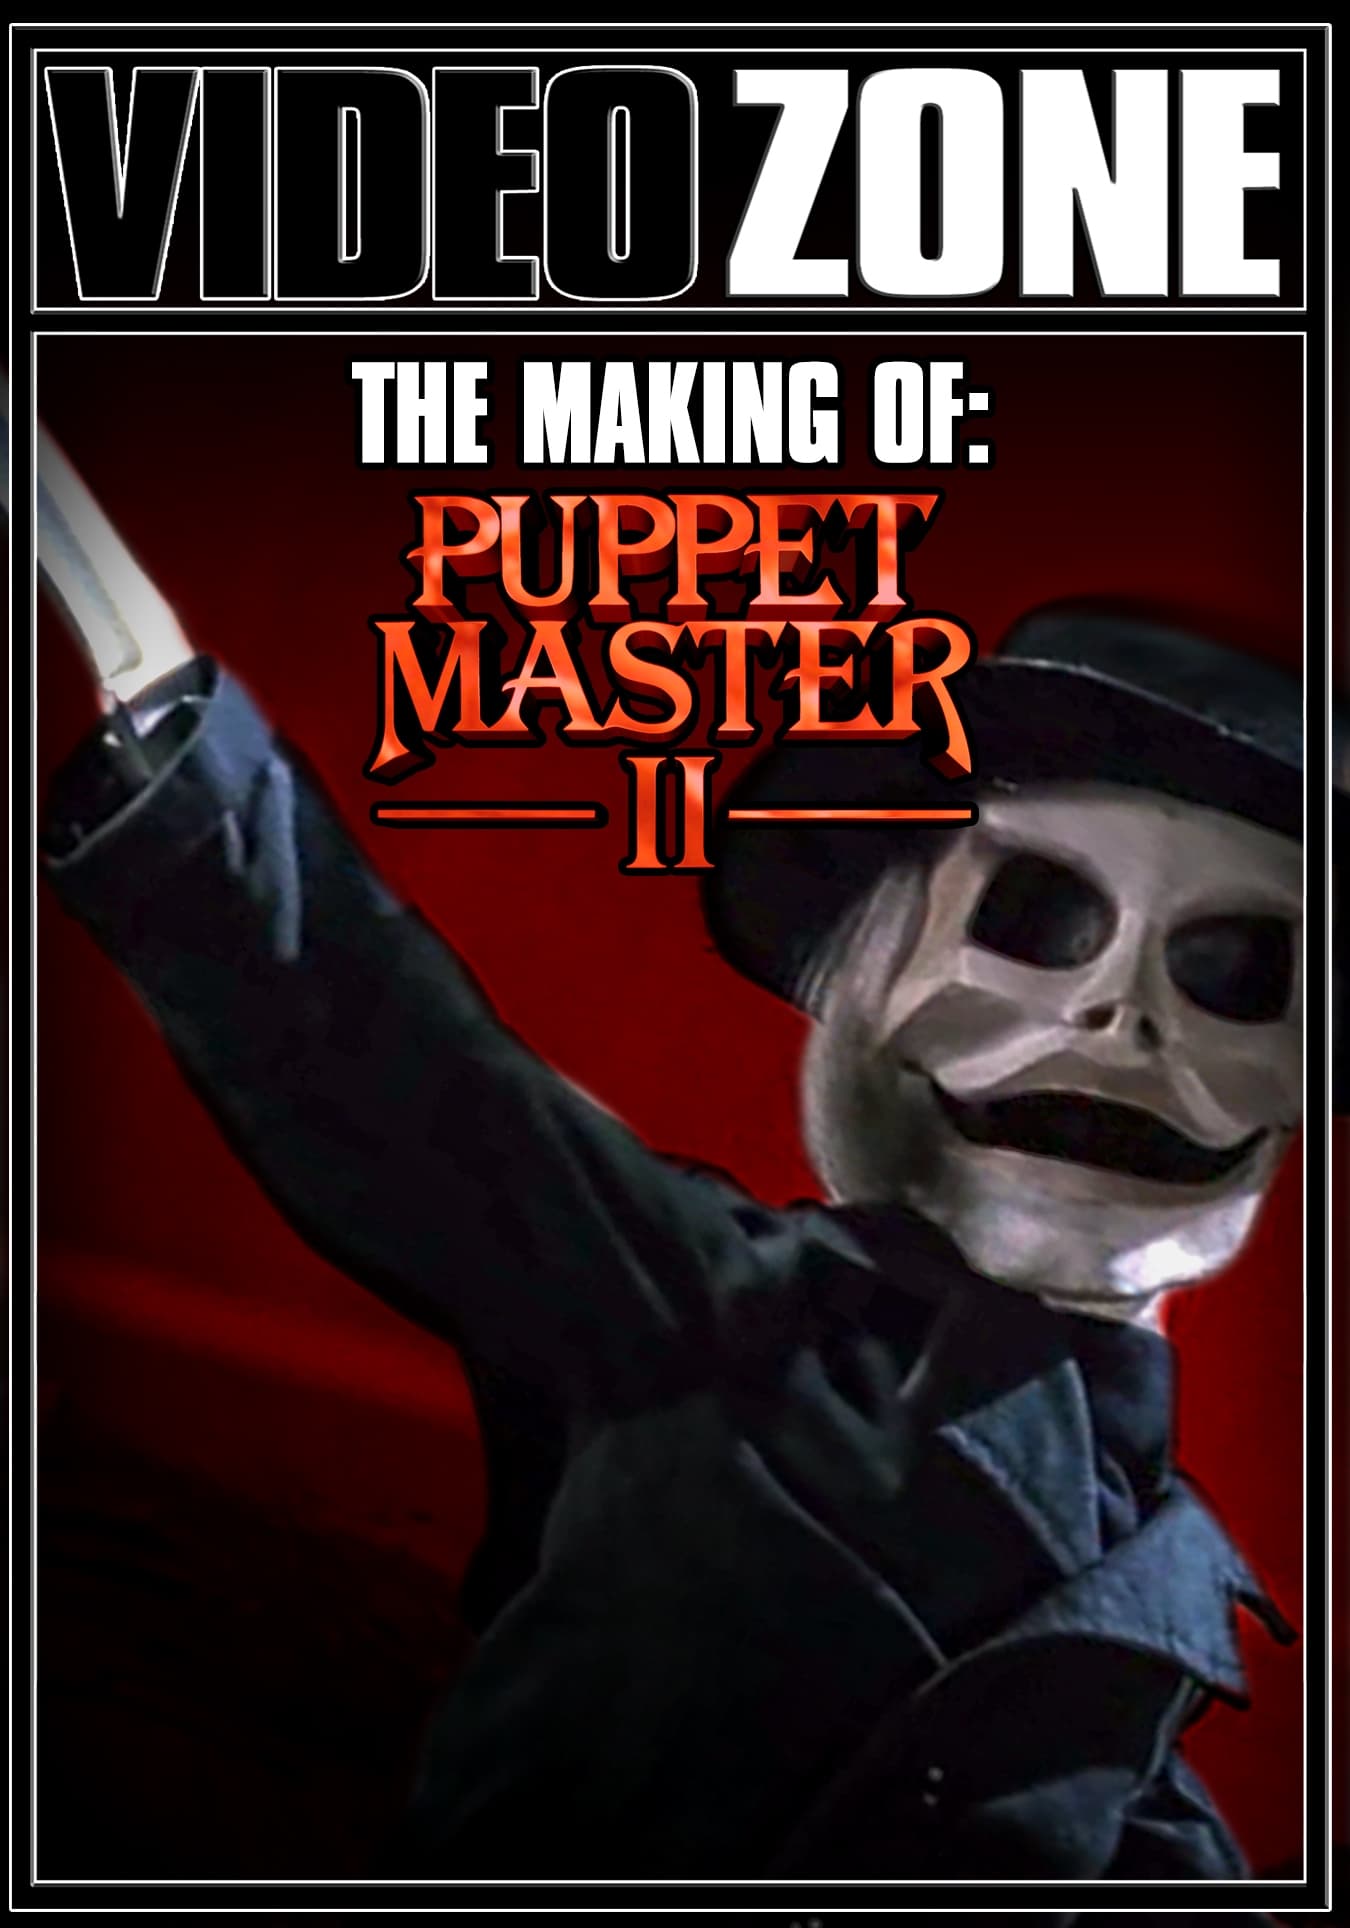 Videozone: The Making of "Puppet Master II"